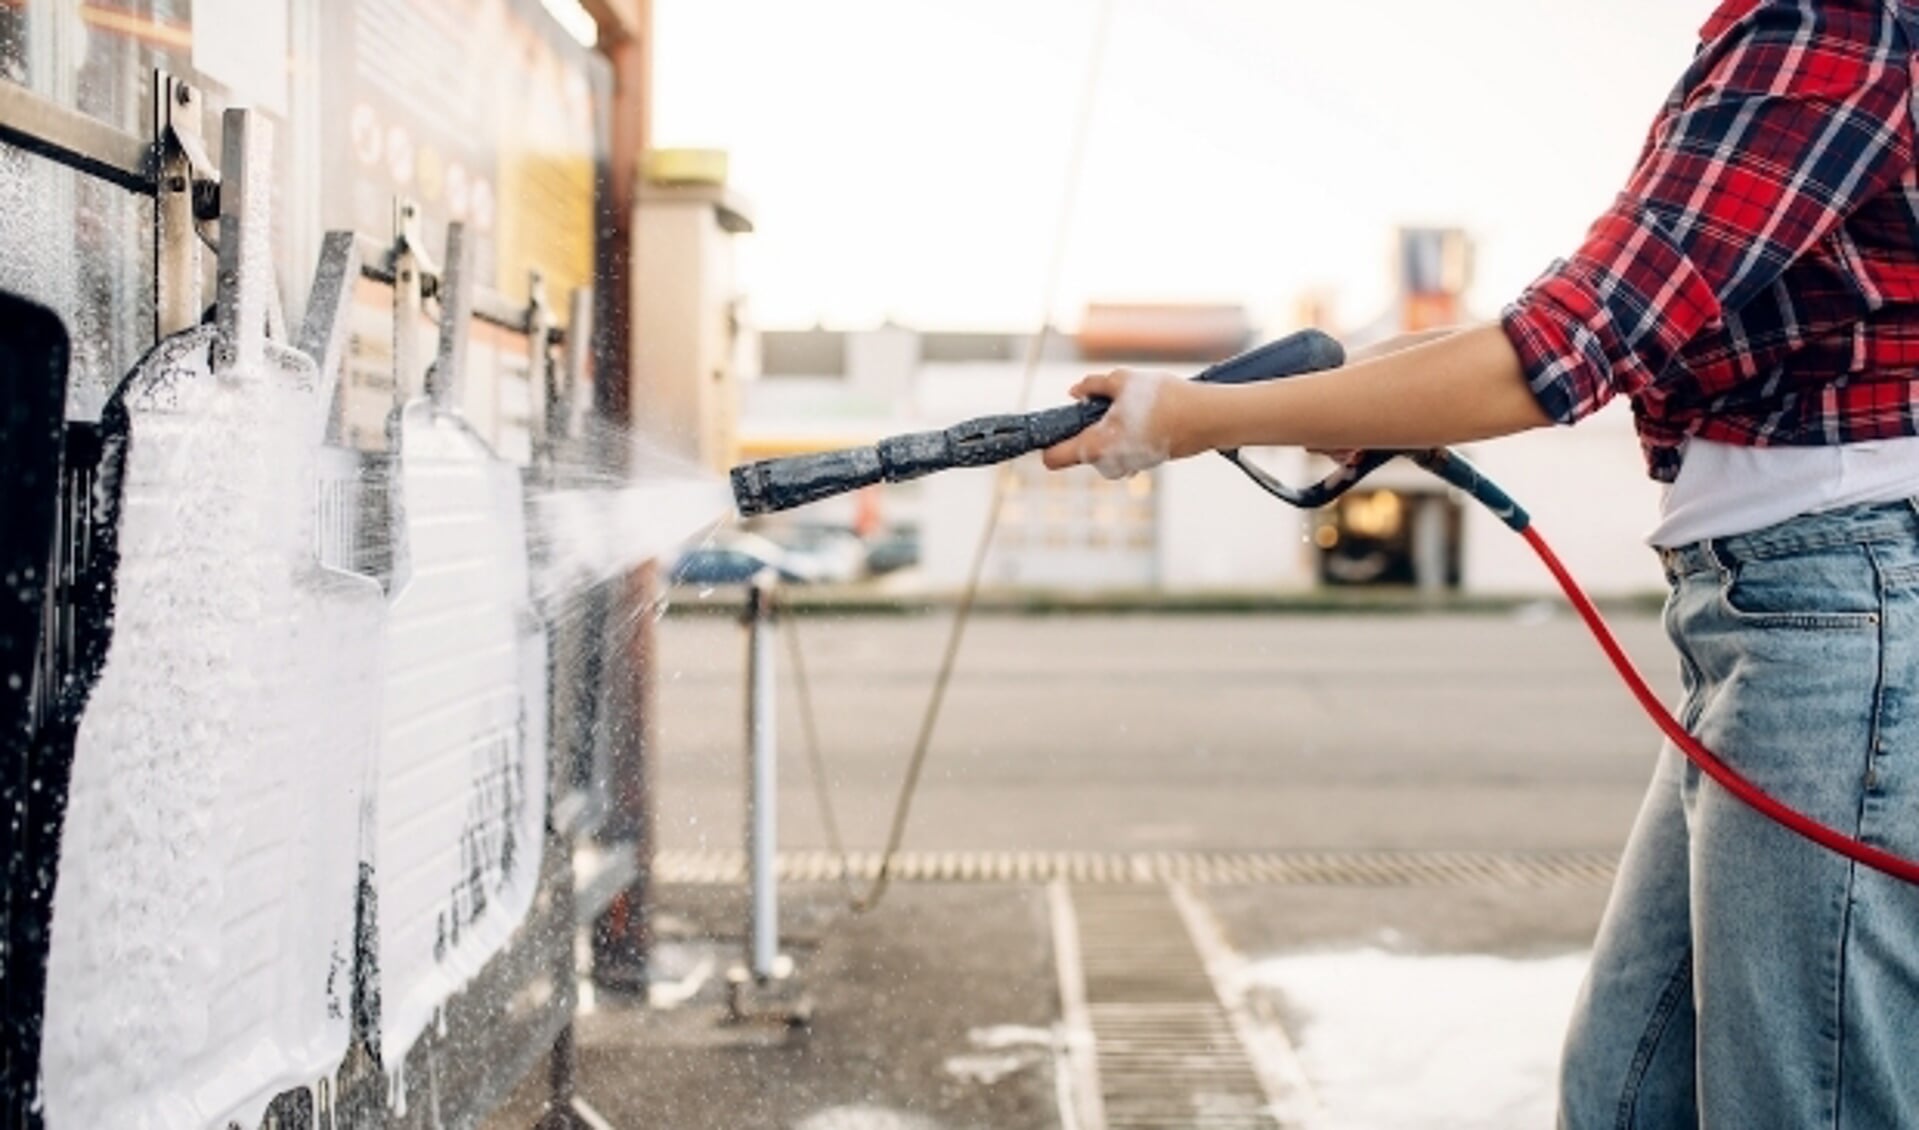 Female person with high pressure water gun in hands cleans car mats, touchless carwash. Young woman on self-service automobile washing. Outdoor vehicle cleaning at summer day